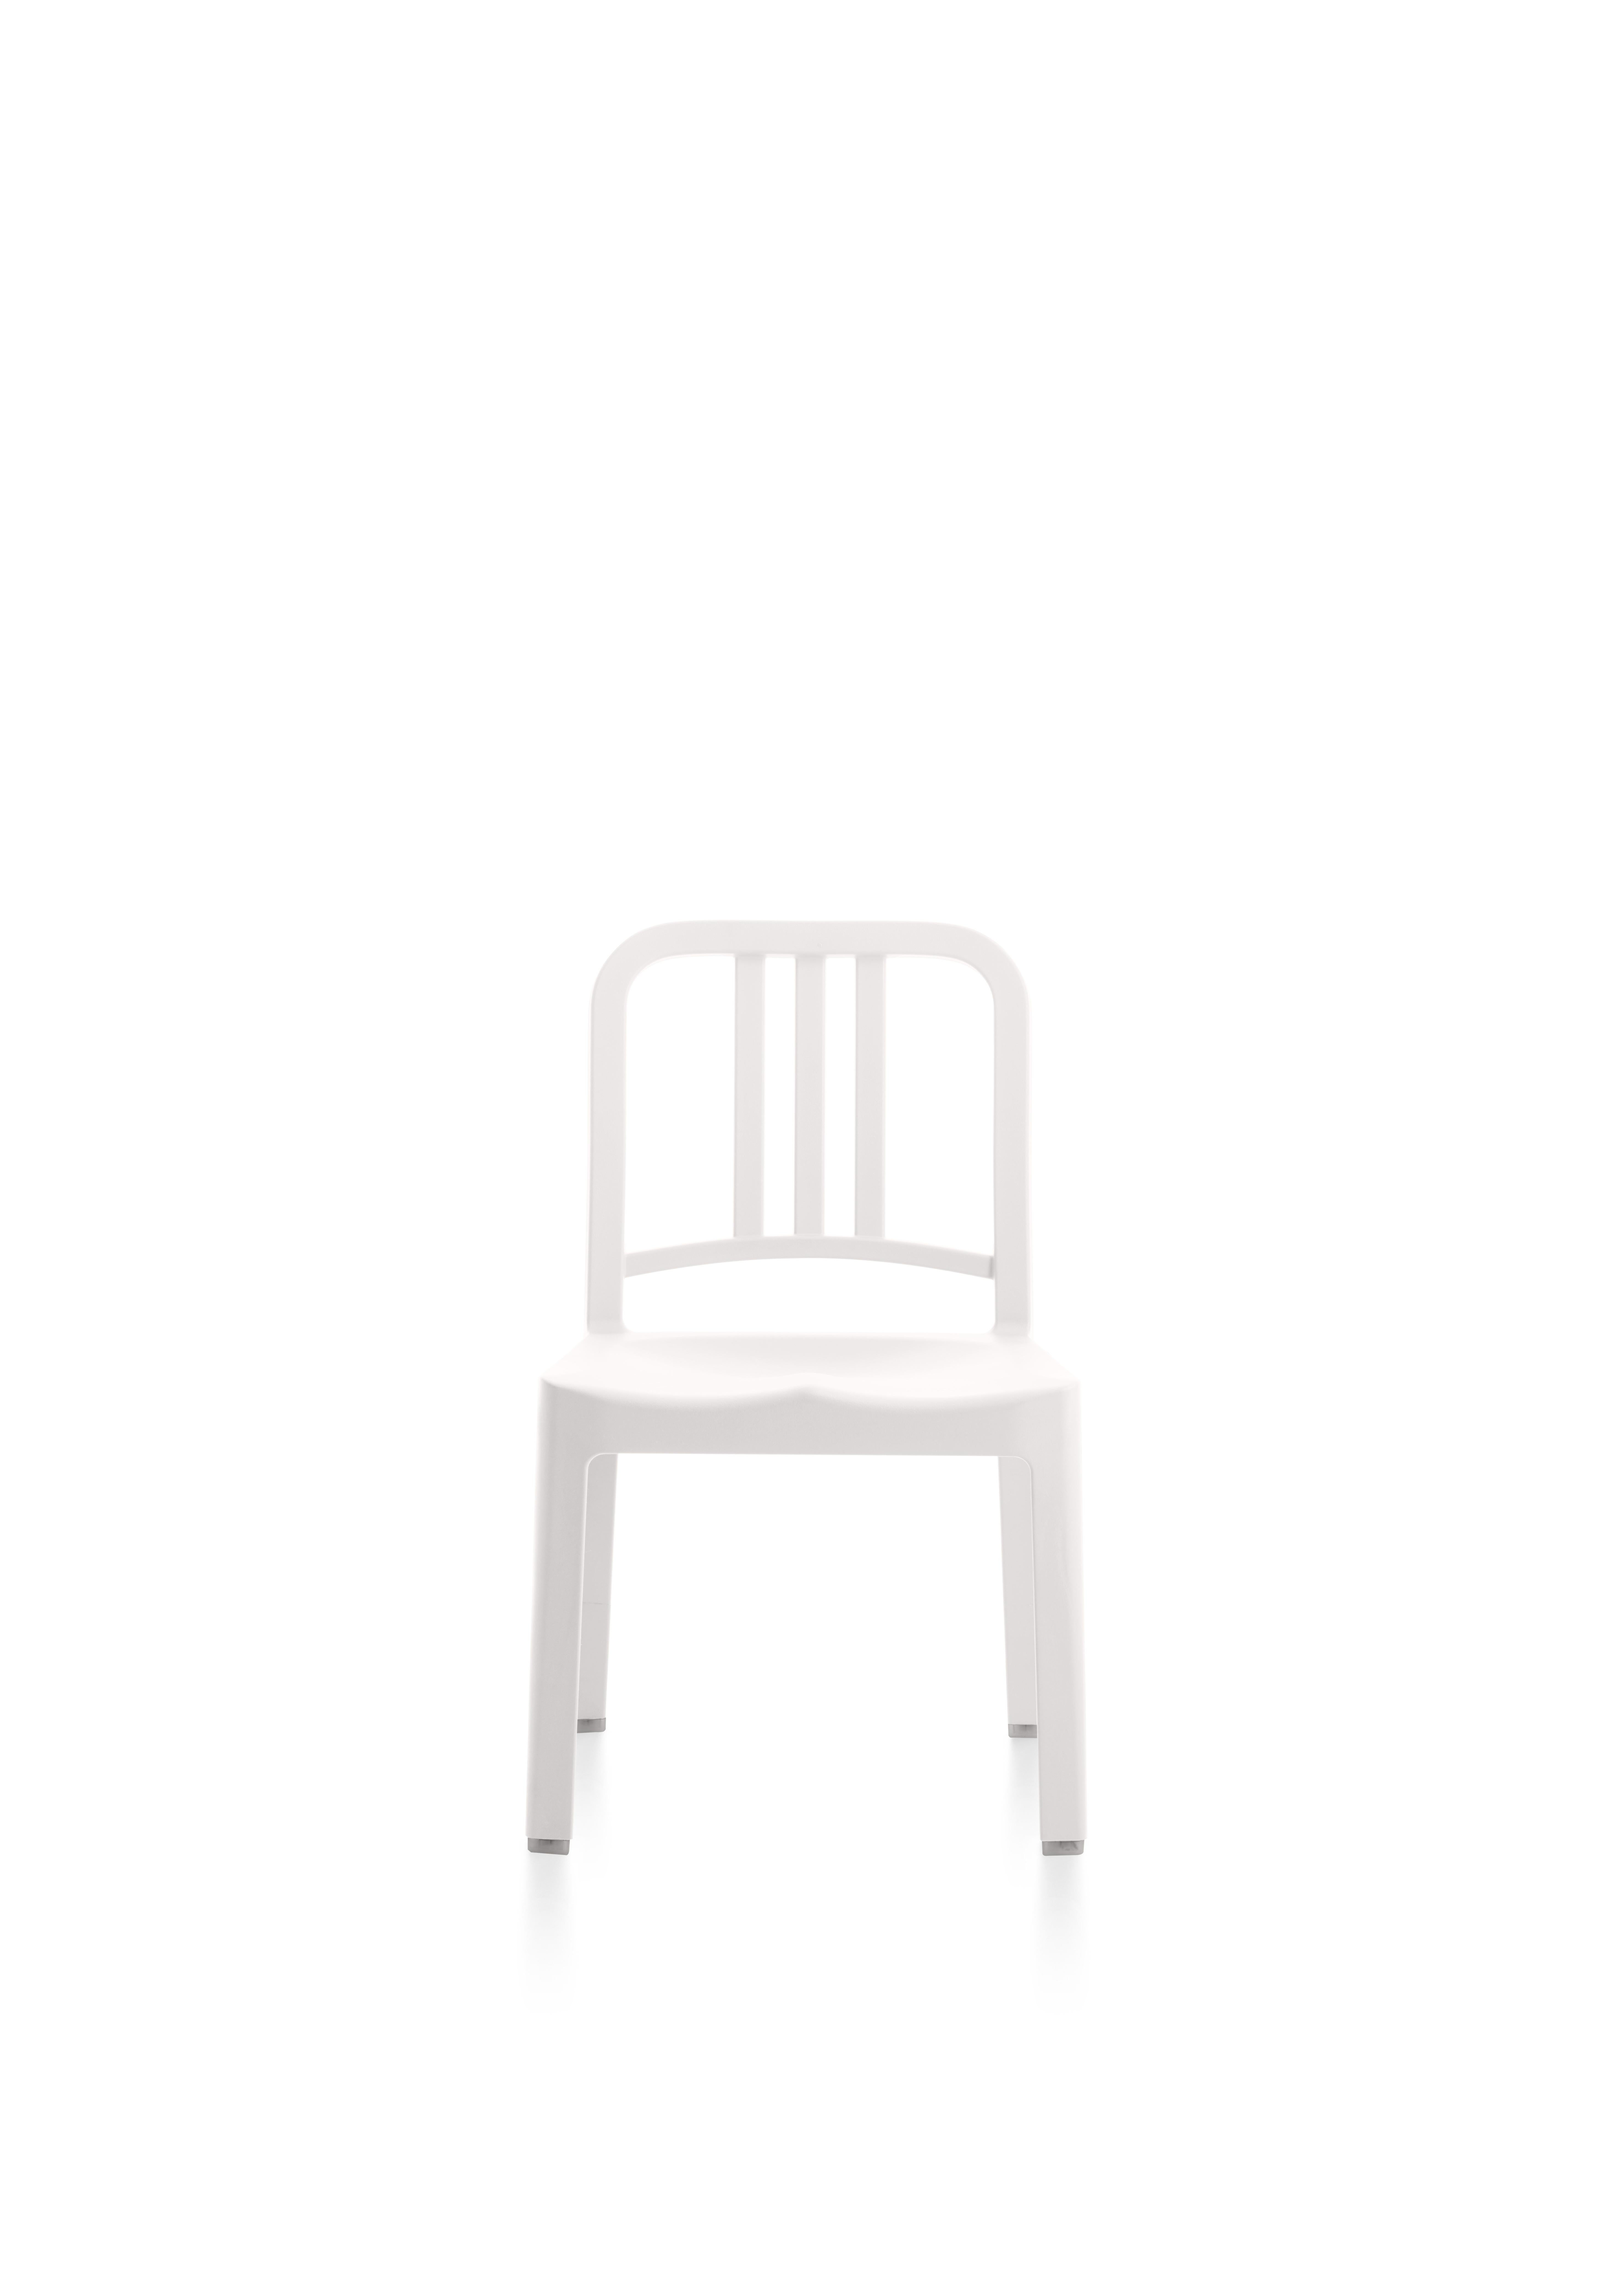 For Sale: White (Snow) 111 Navy Mini Chair by Coca-Cola